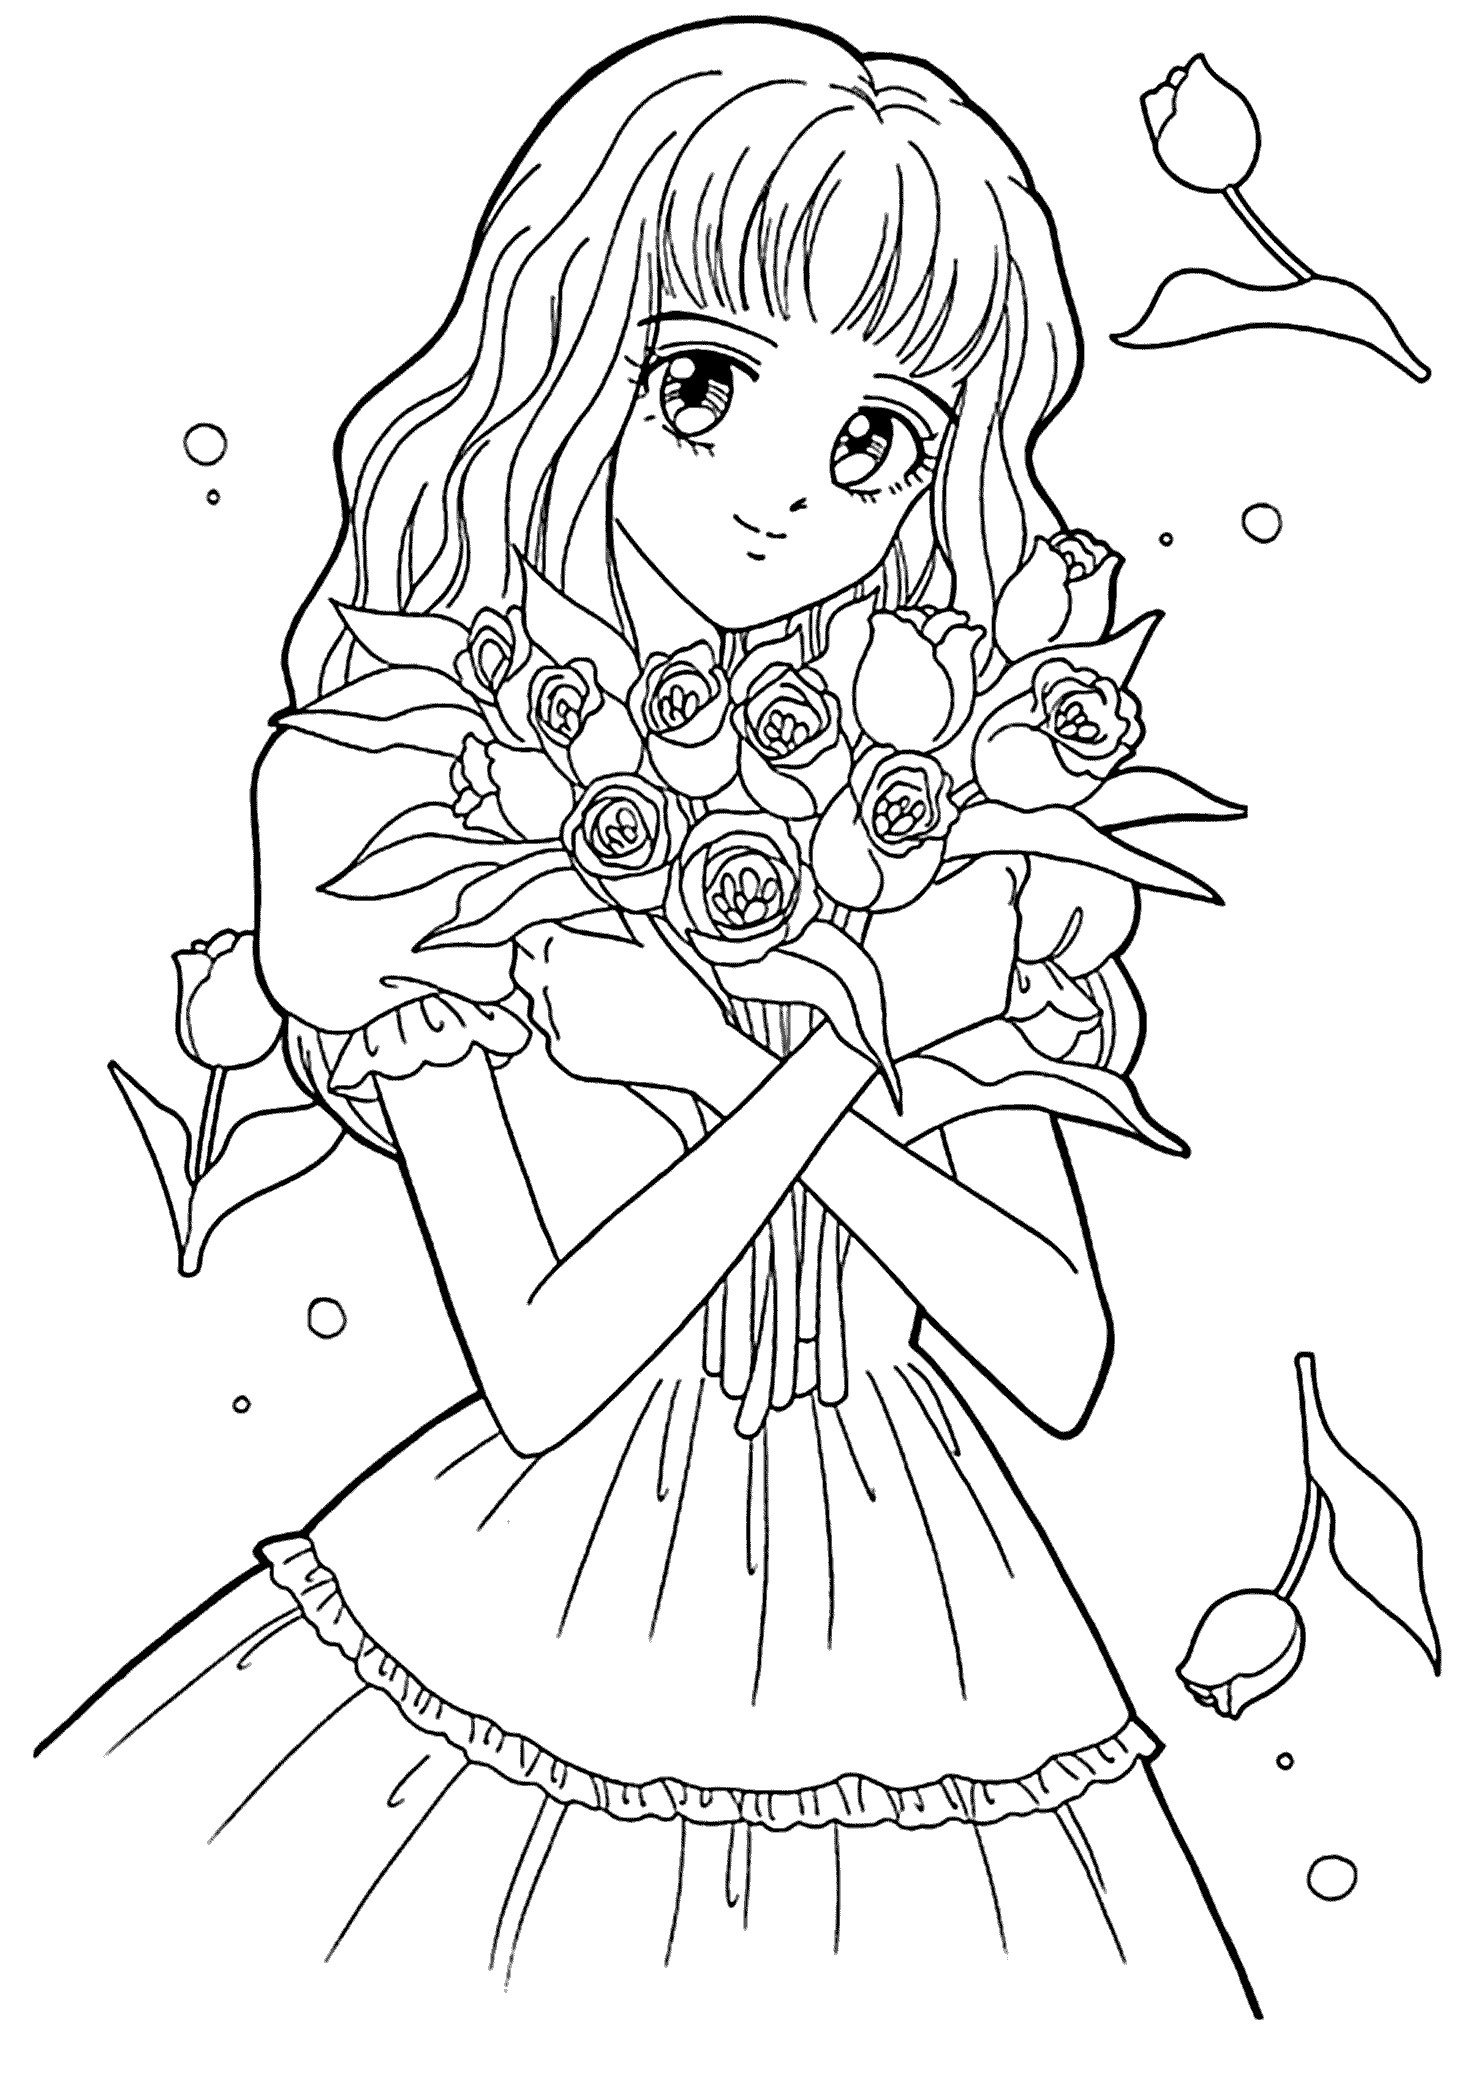 Free Coloring Pages For Girls
 Best Free Printable Coloring Pages for Kids and Teens